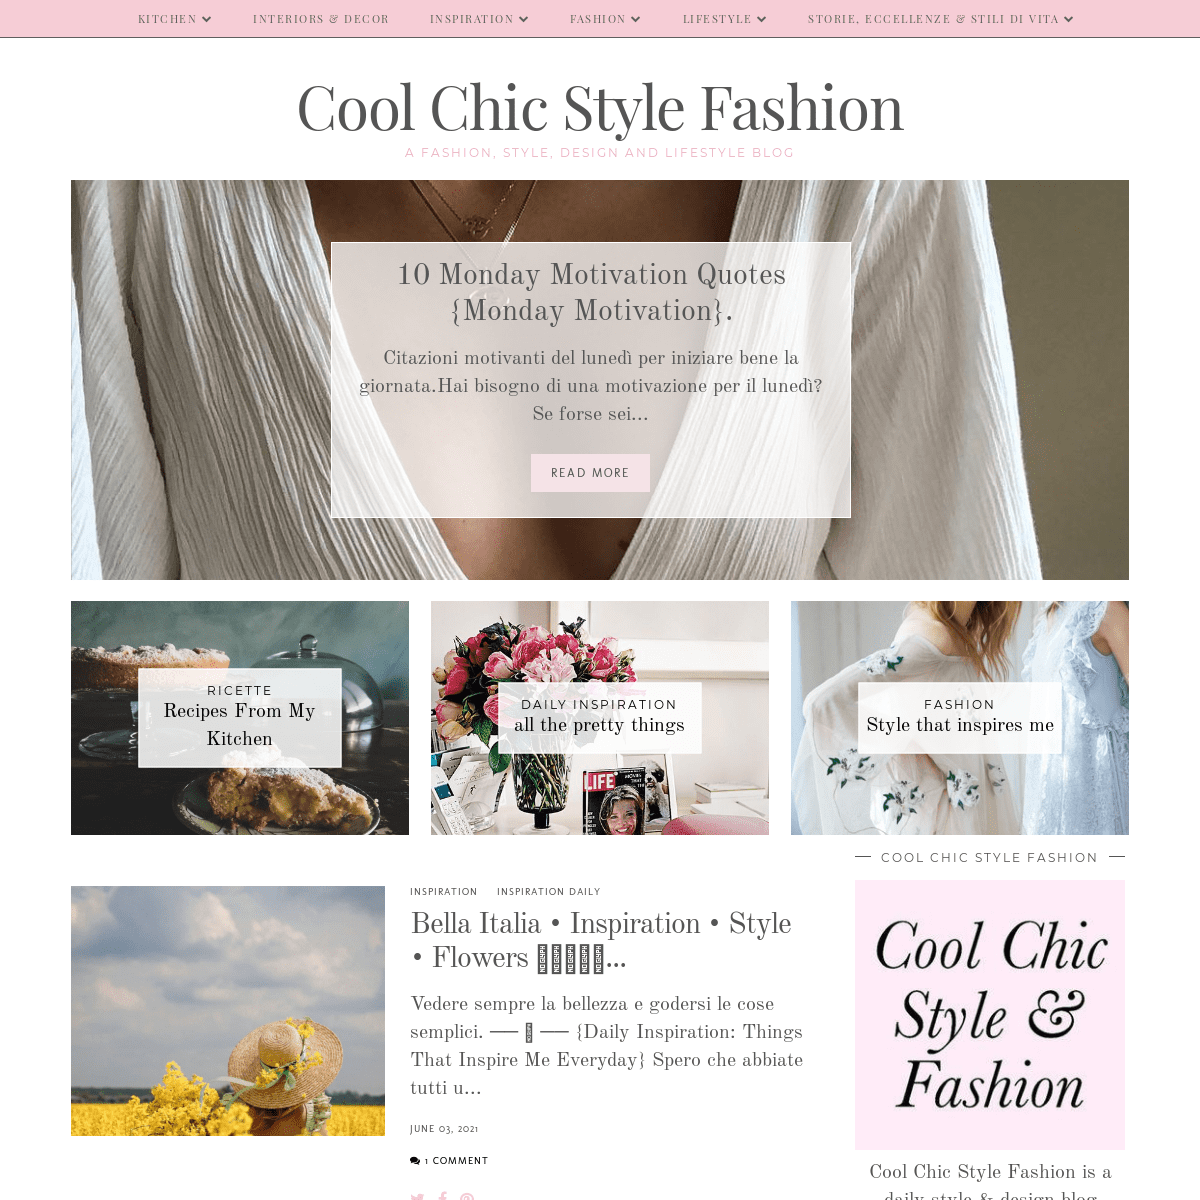 A complete backup of https://coolchicstylefashion.com